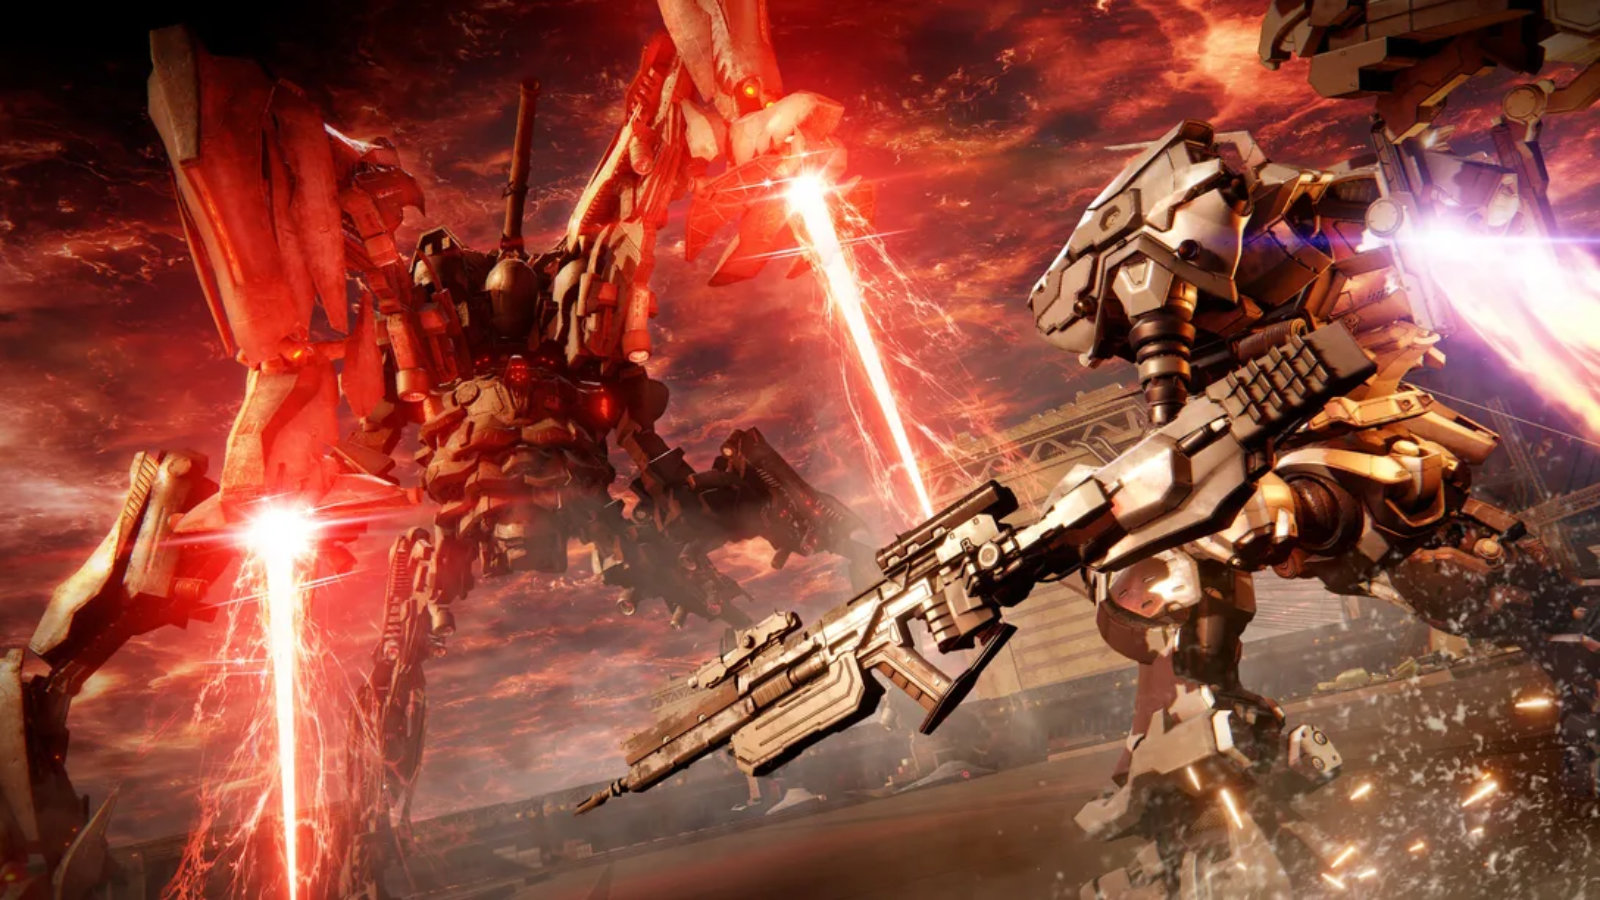 Armored Core VI: Fires of Rubicon, Sony Playstation 4